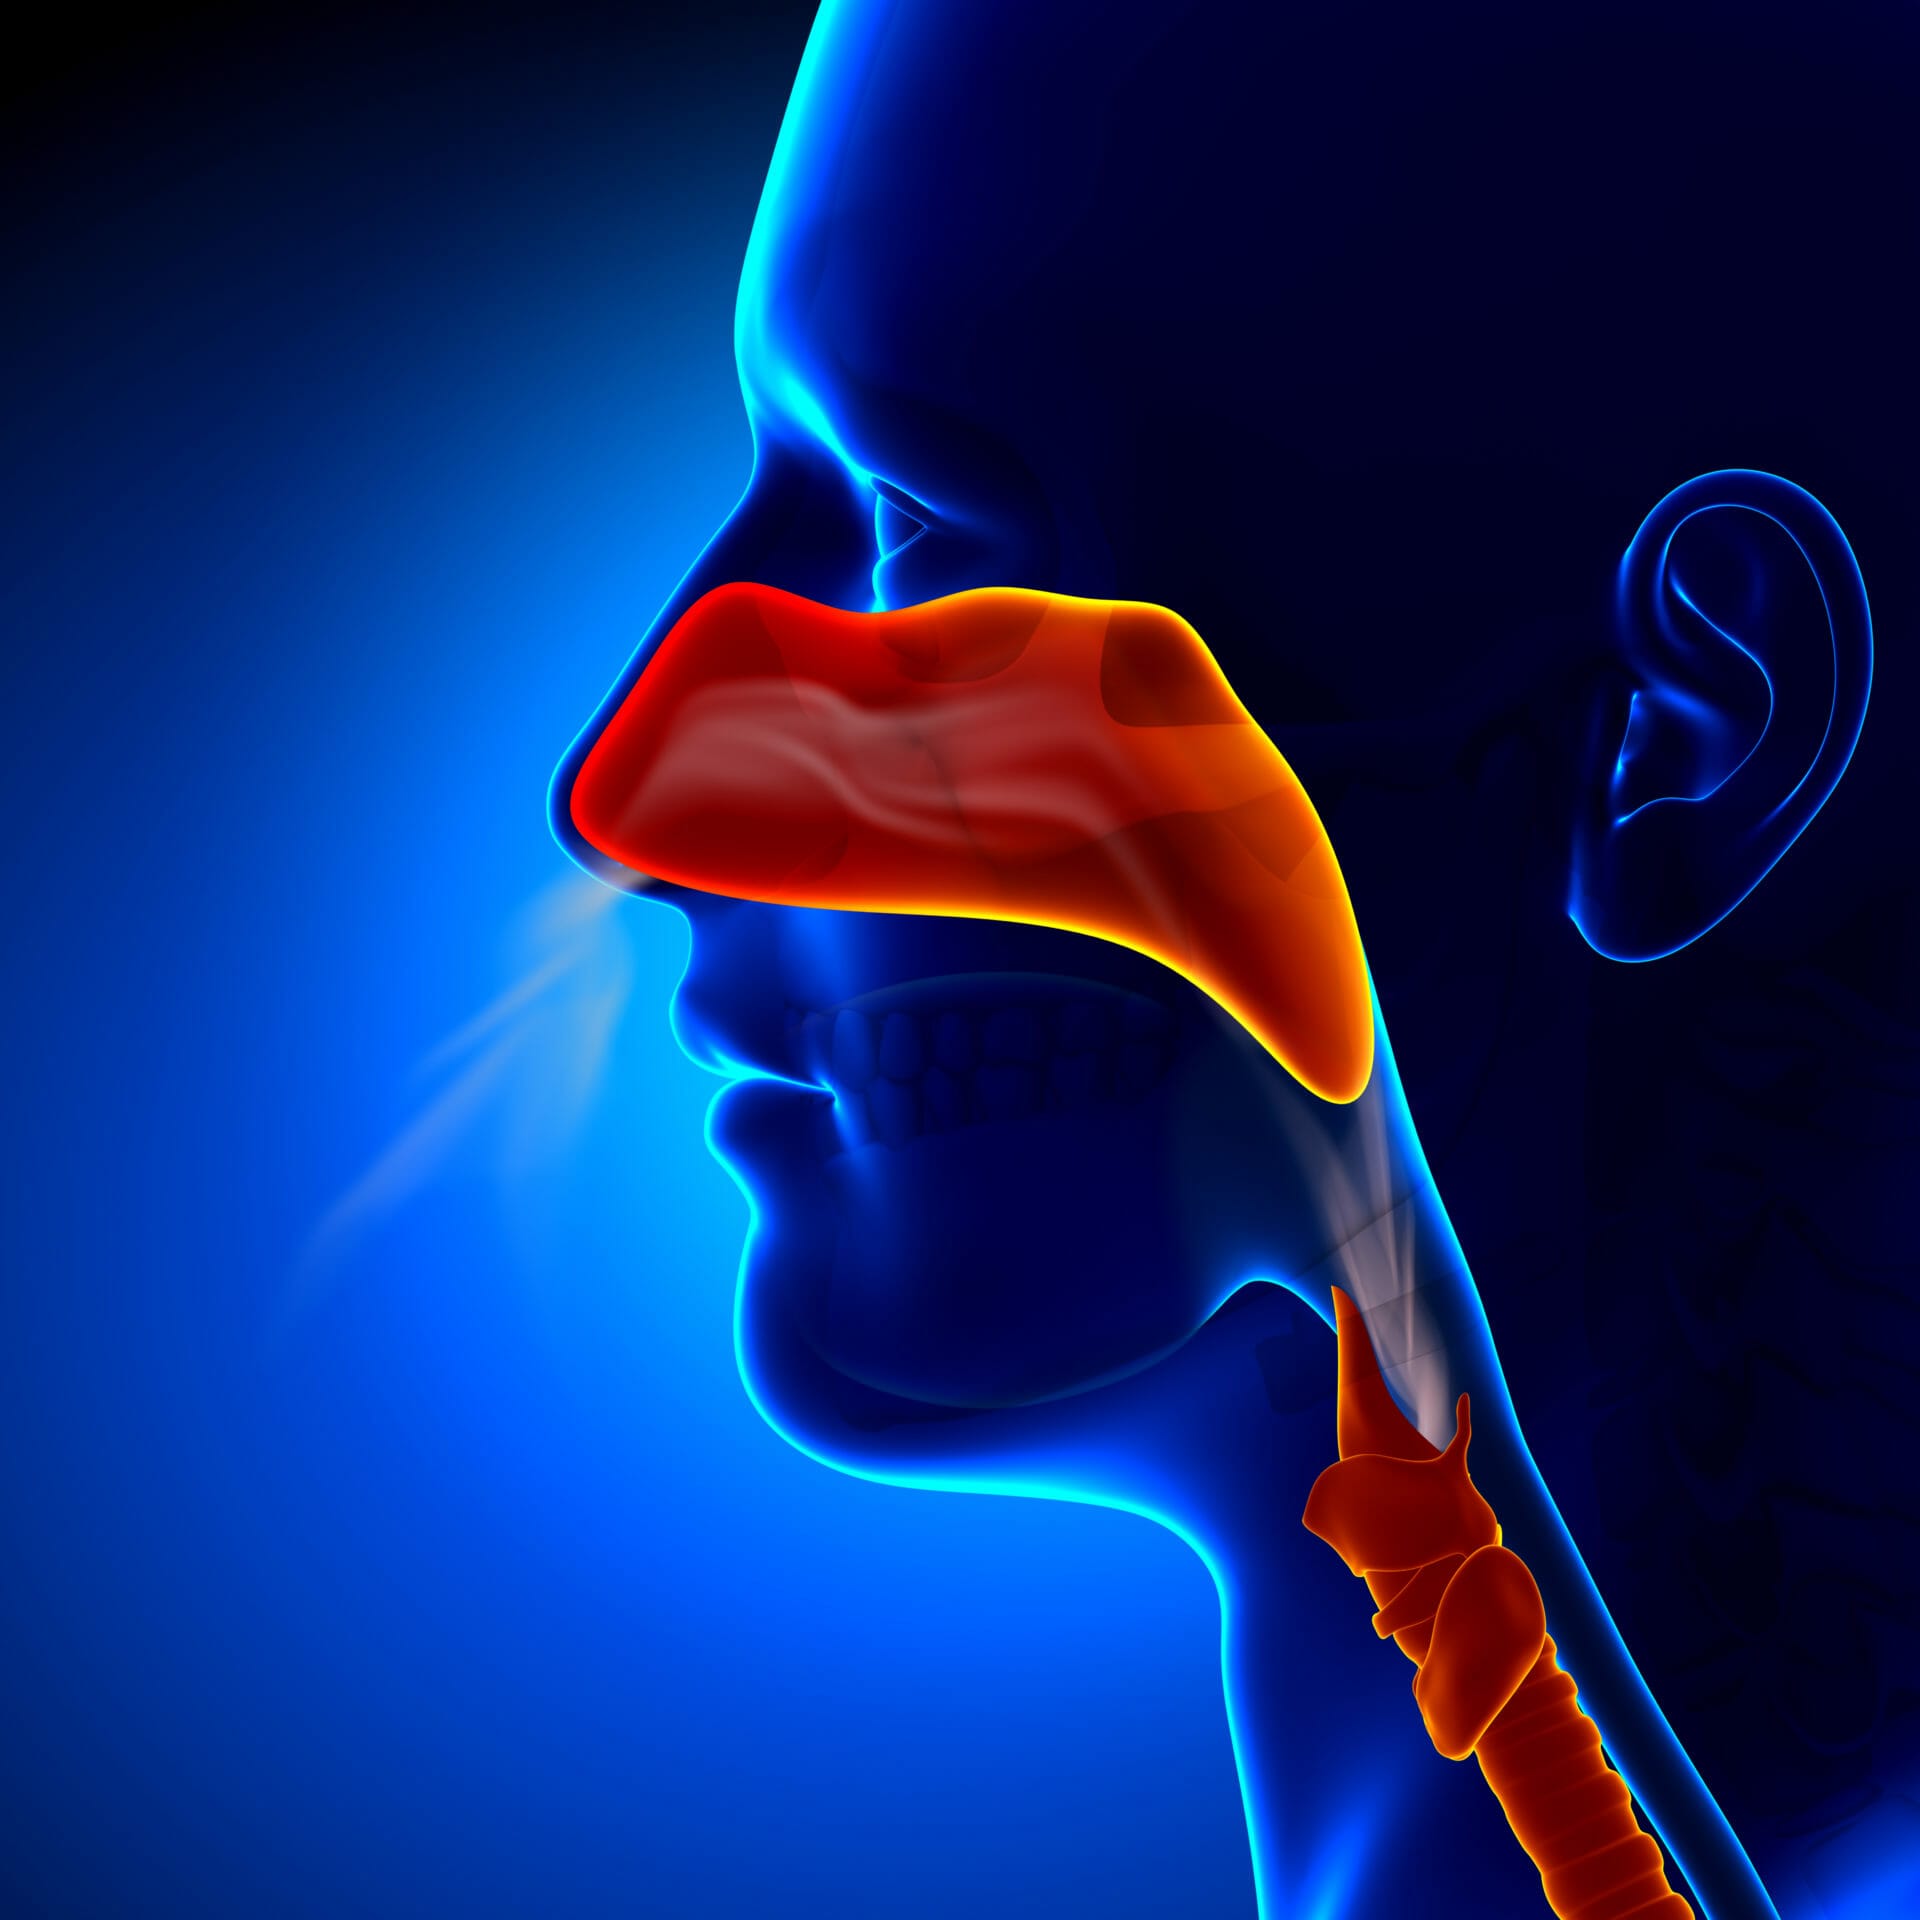 Nose Breathing And Why You Should Stop Breathing Through Your Mouth